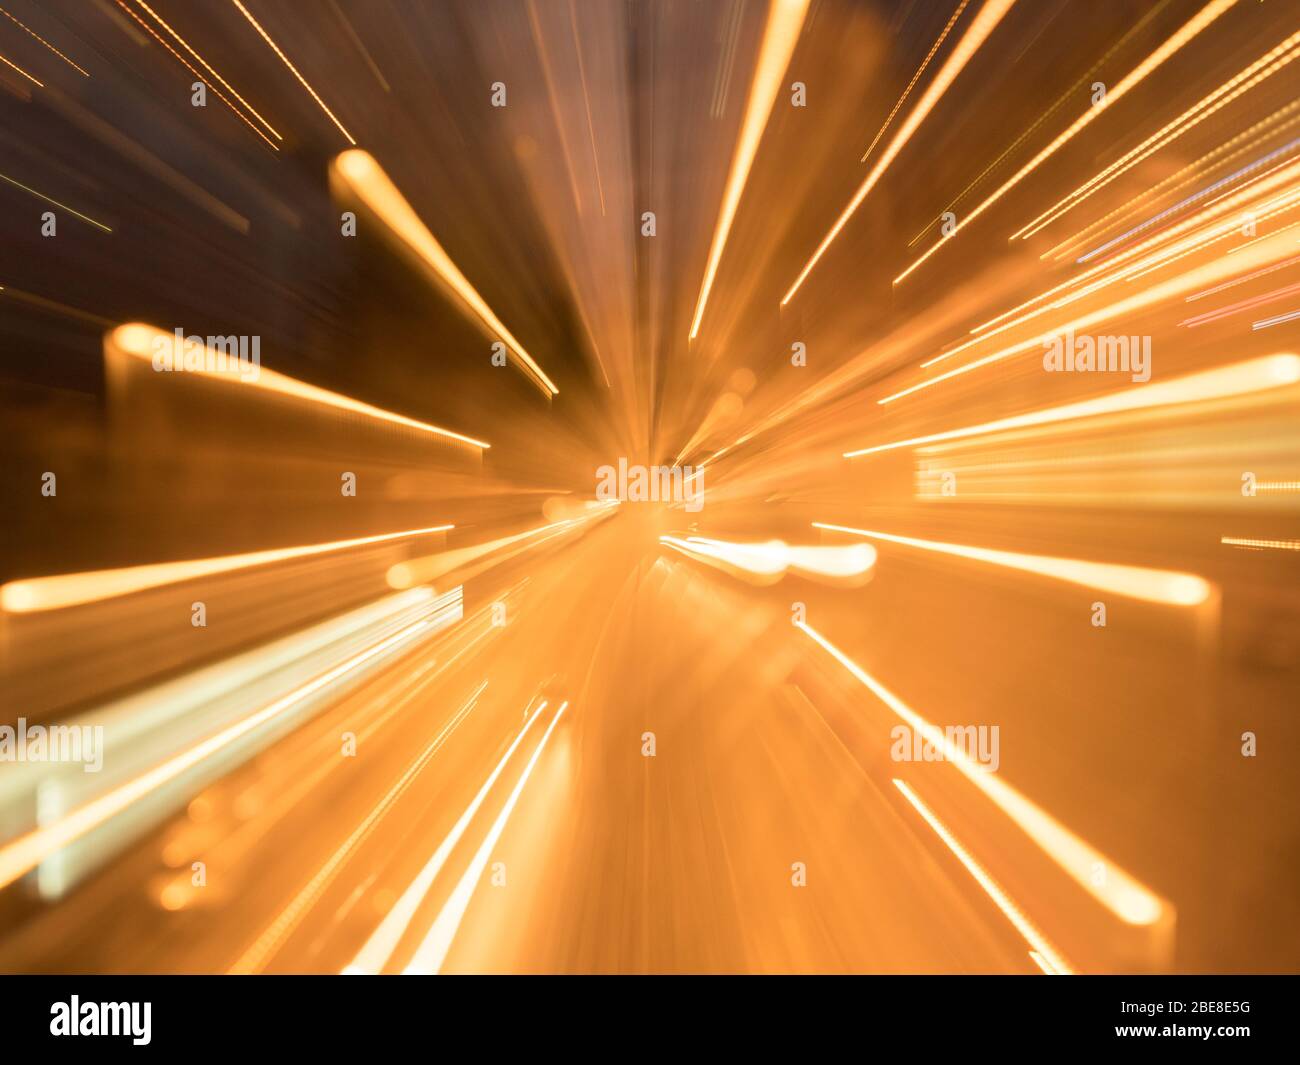 Simple bright and energetic orange graphic background Stock Photo